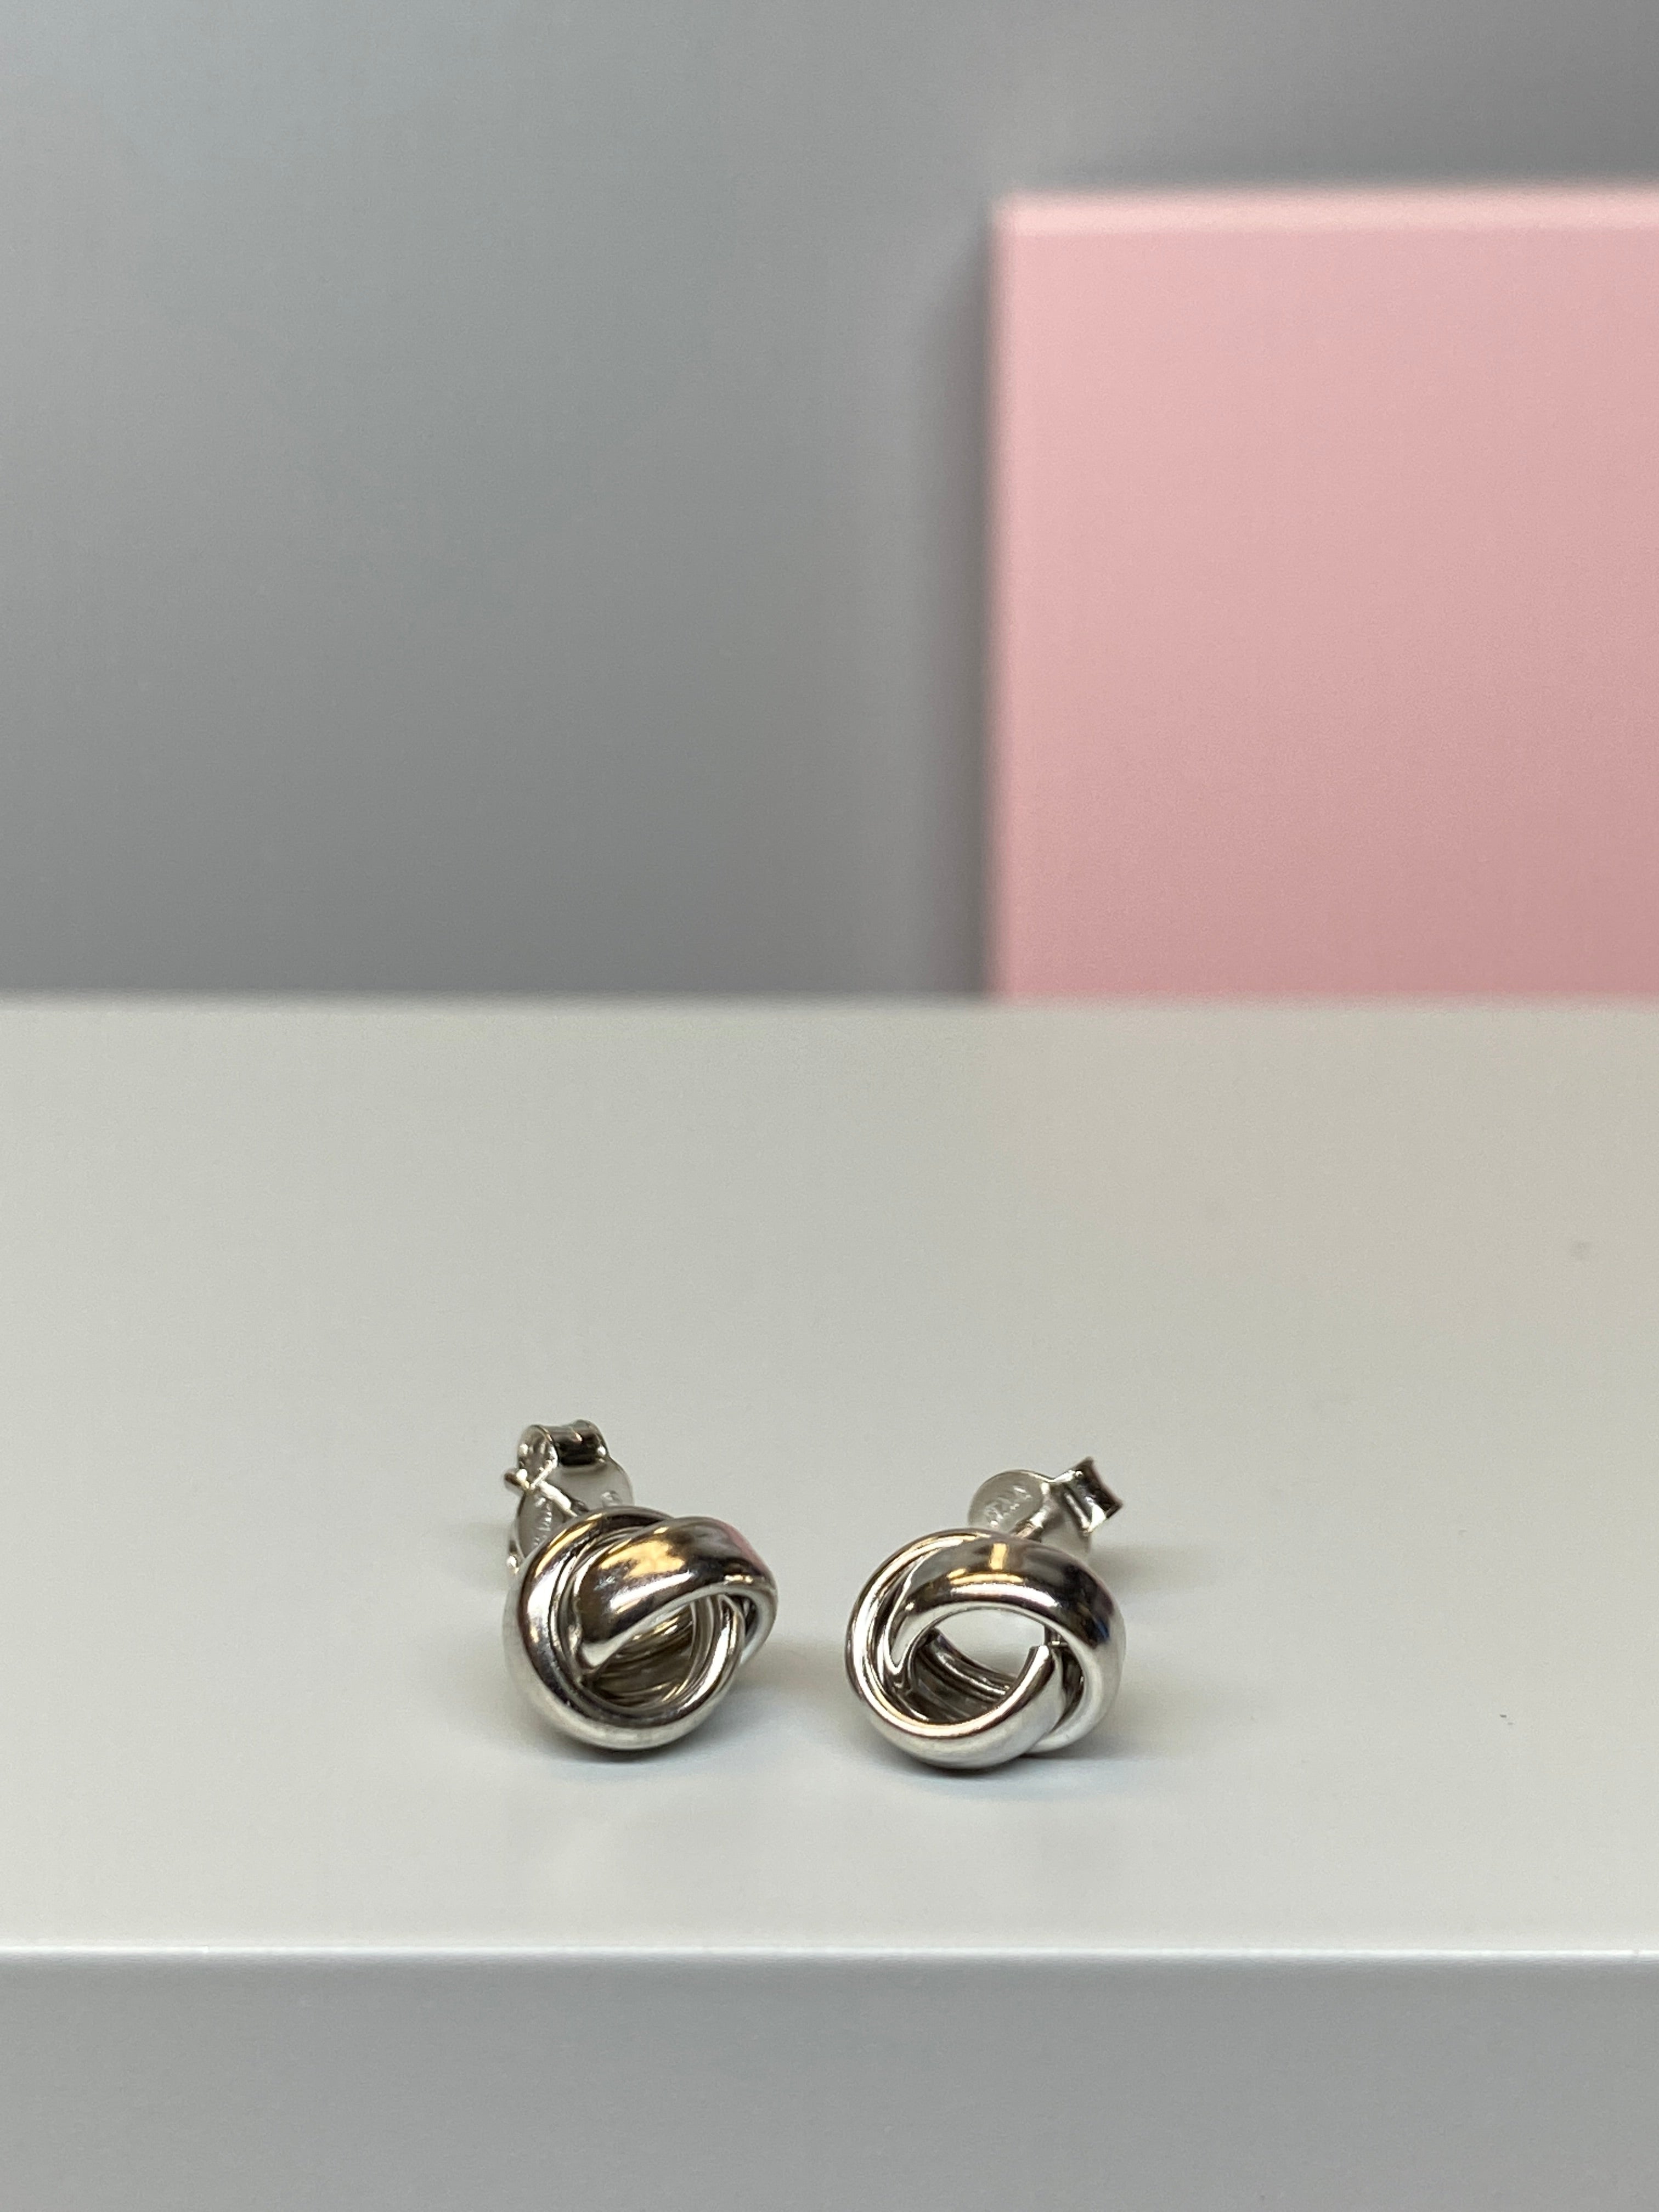 Sterling Silver Knot Earrings - 9mm - Hallmark Jewellers Formby & The Jewellers Bench Widnes